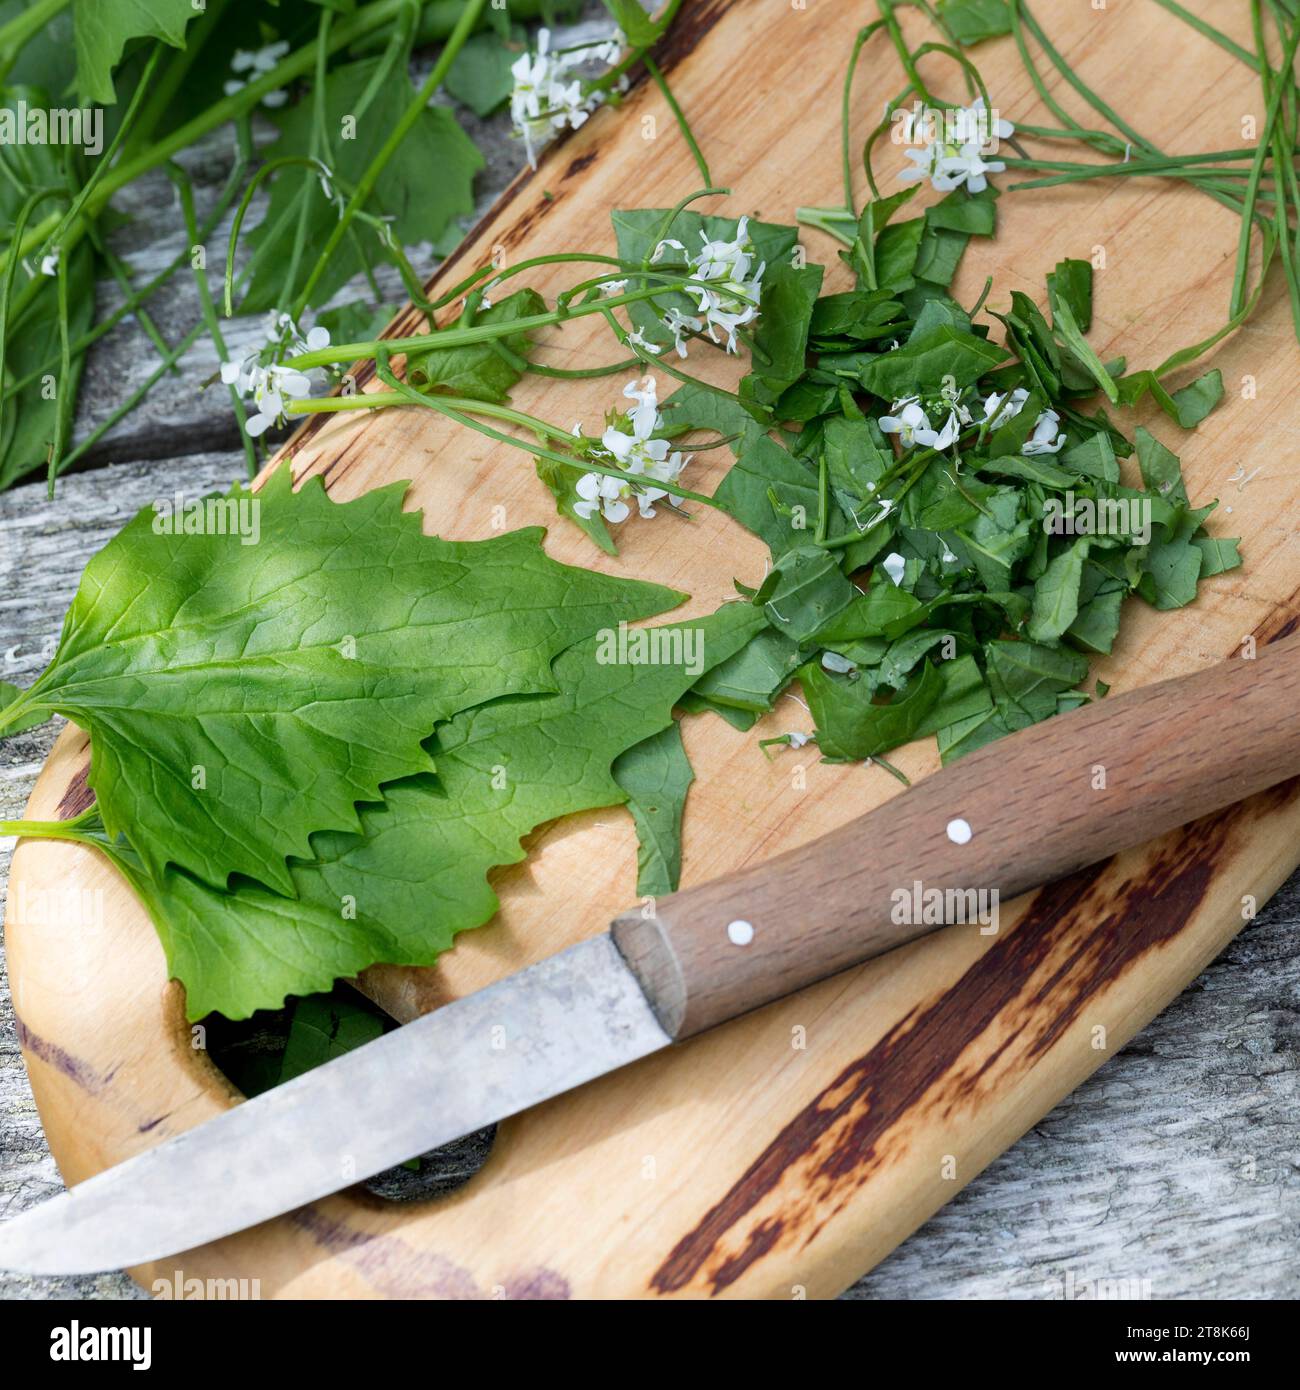 Garlic mustard, Hedge Garlic, Jack-by-the-Hedge (Alliaria petiolata), collected Garlic mustard ist chopped with a knife Stock Photo